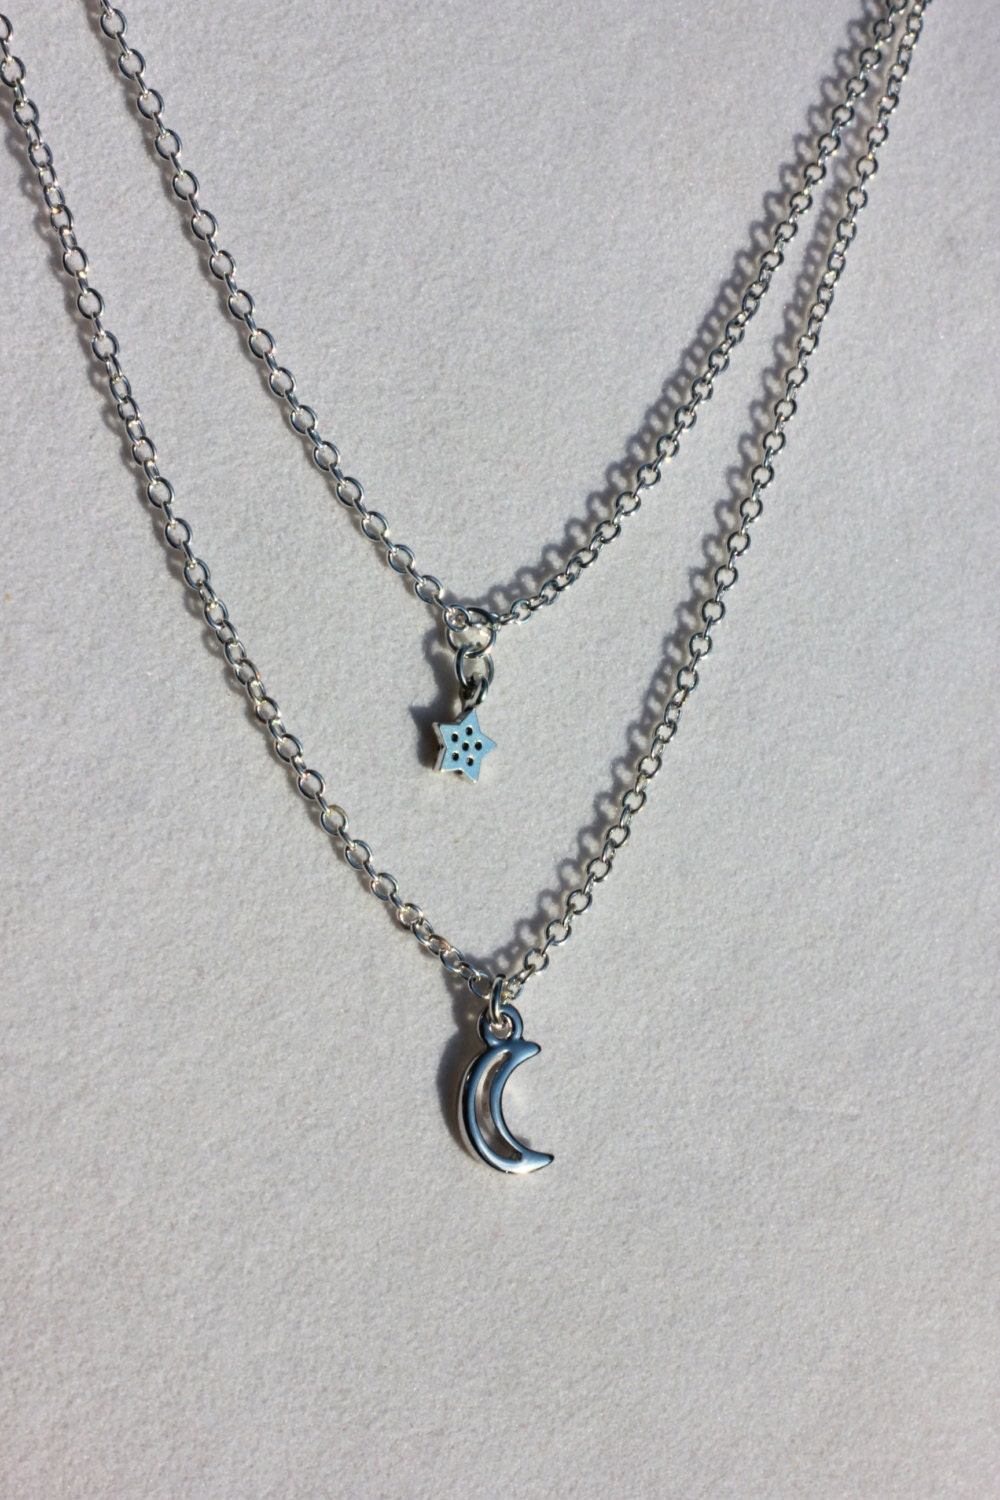 Petite Layered Crescent Moon and Star Necklace Celestial